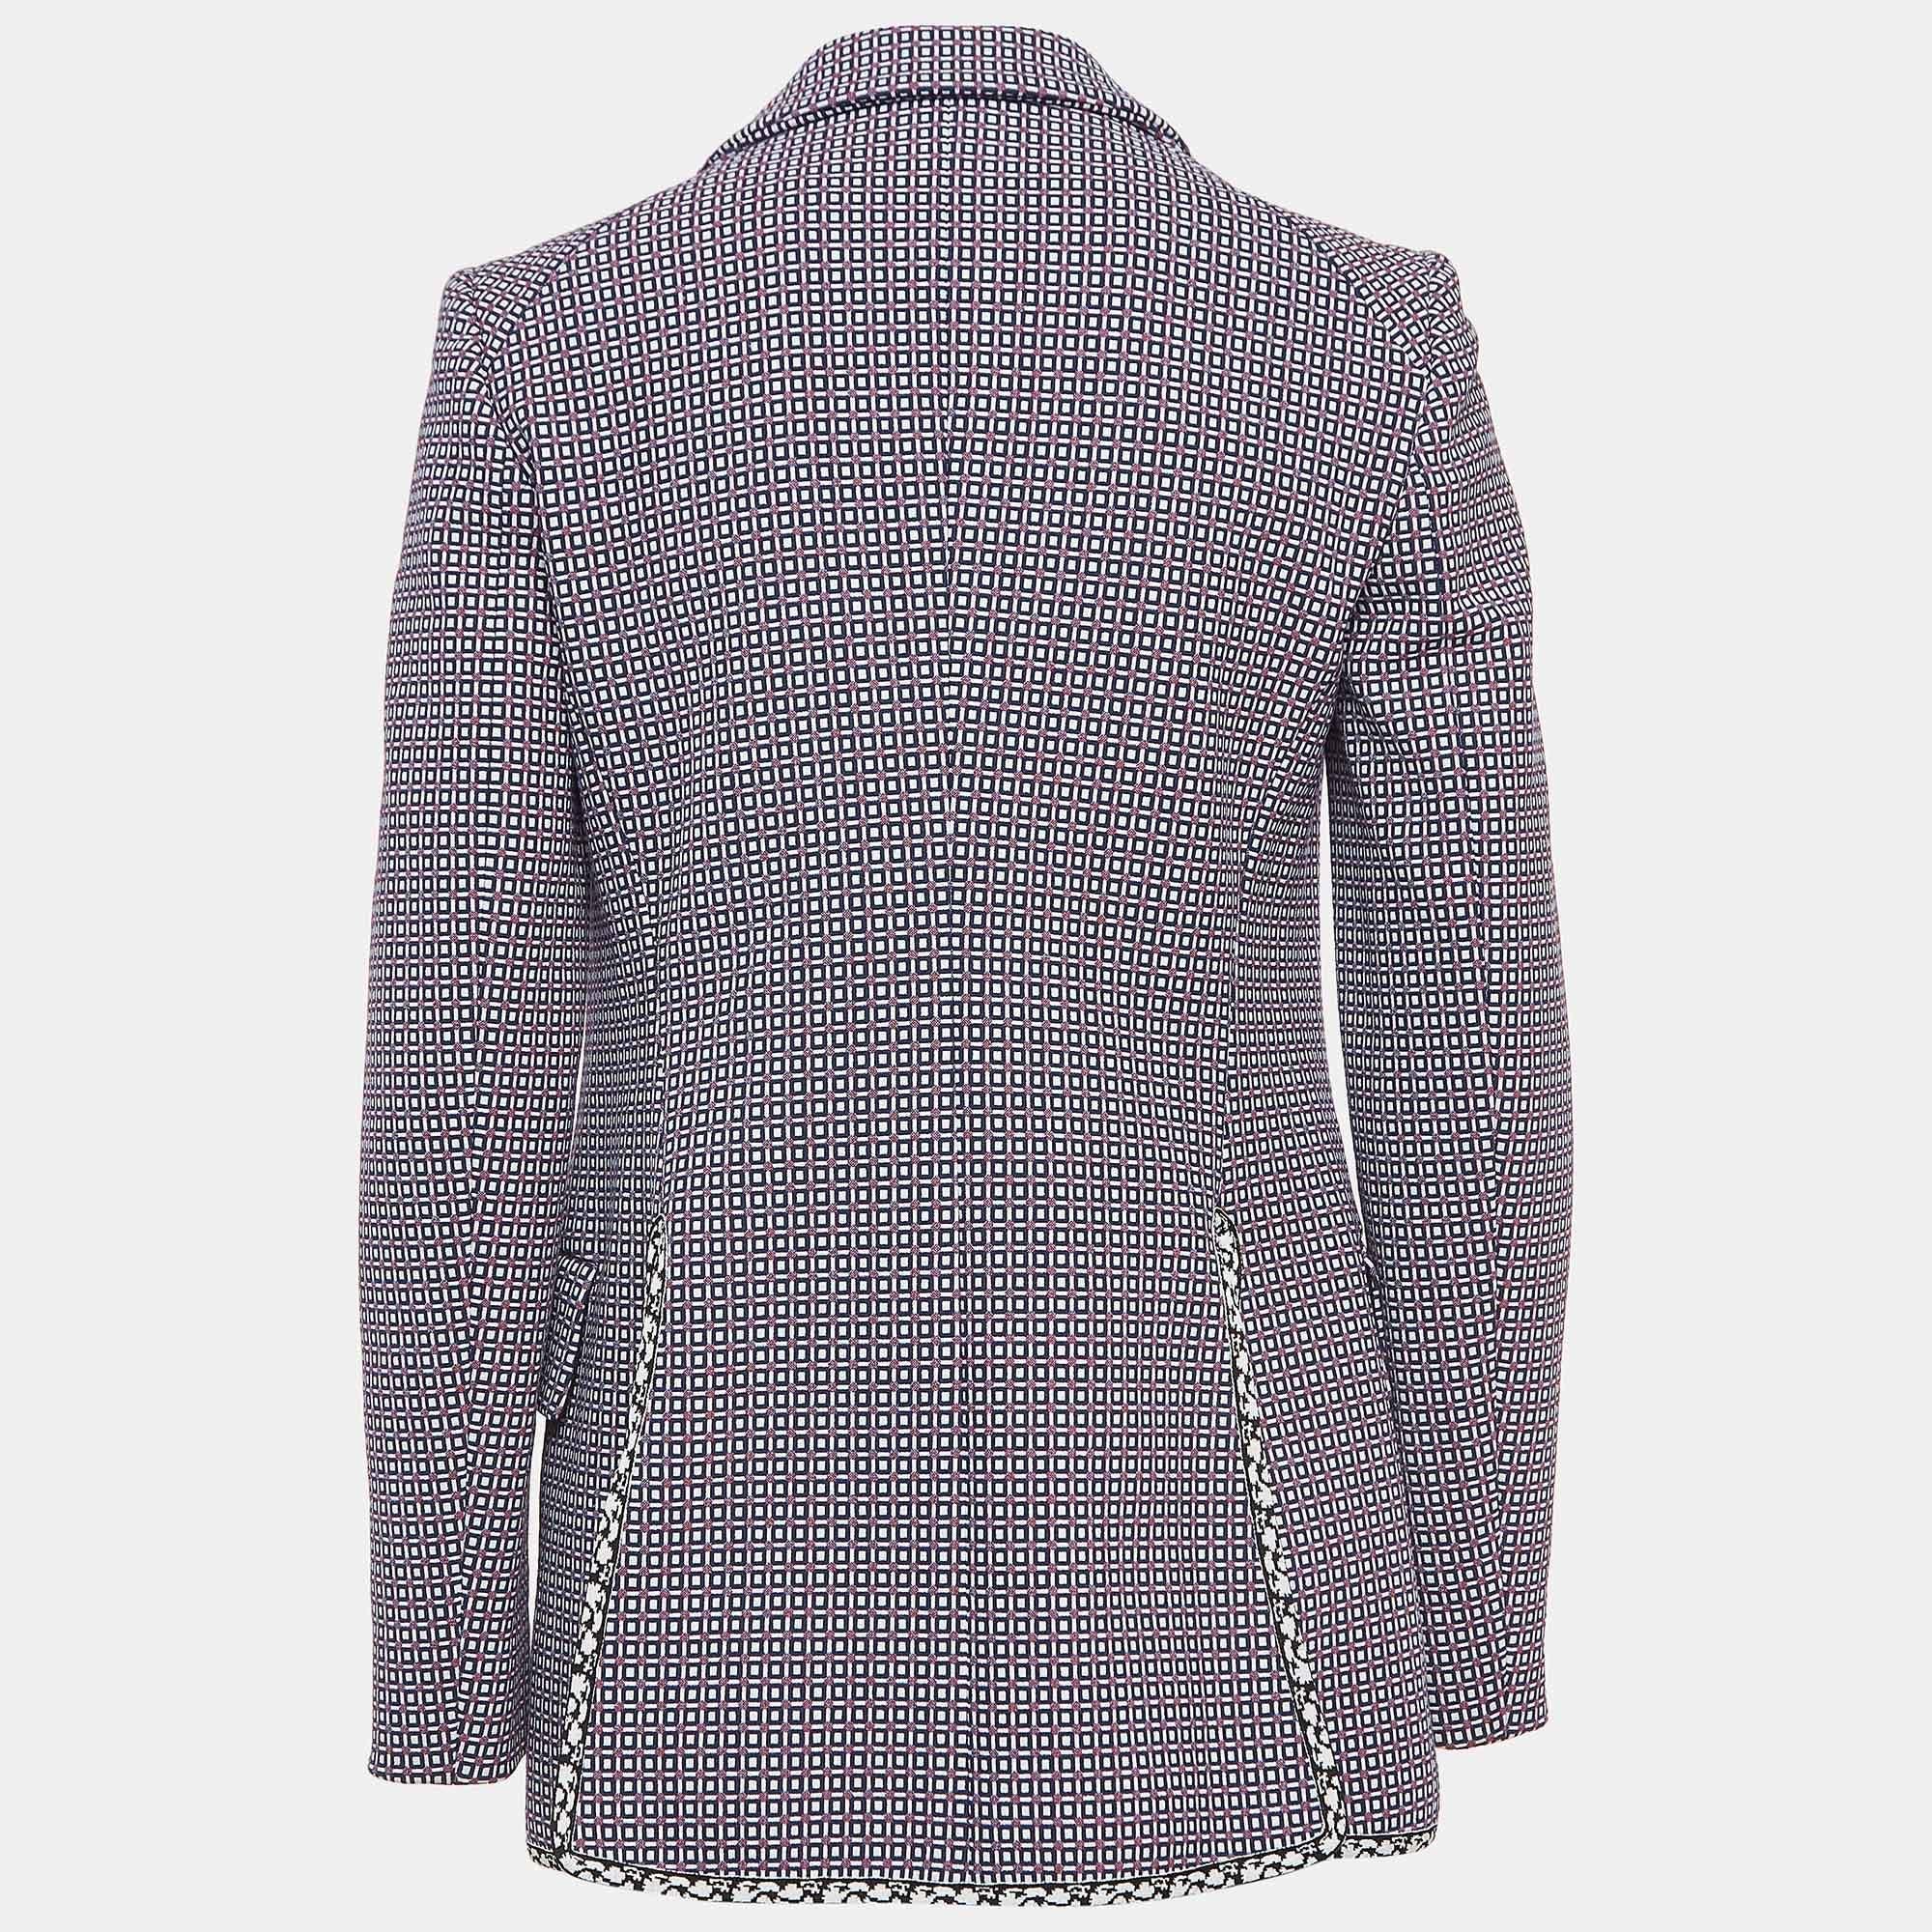 Crafted by Christian Dior, this blazer boasts a mesmerizing blue geometric pattern, adding a contemporary twist to a classic silhouette. Tailored in premium cotton, it features a single-breasted design exuding refinement. Versatile yet striking, it